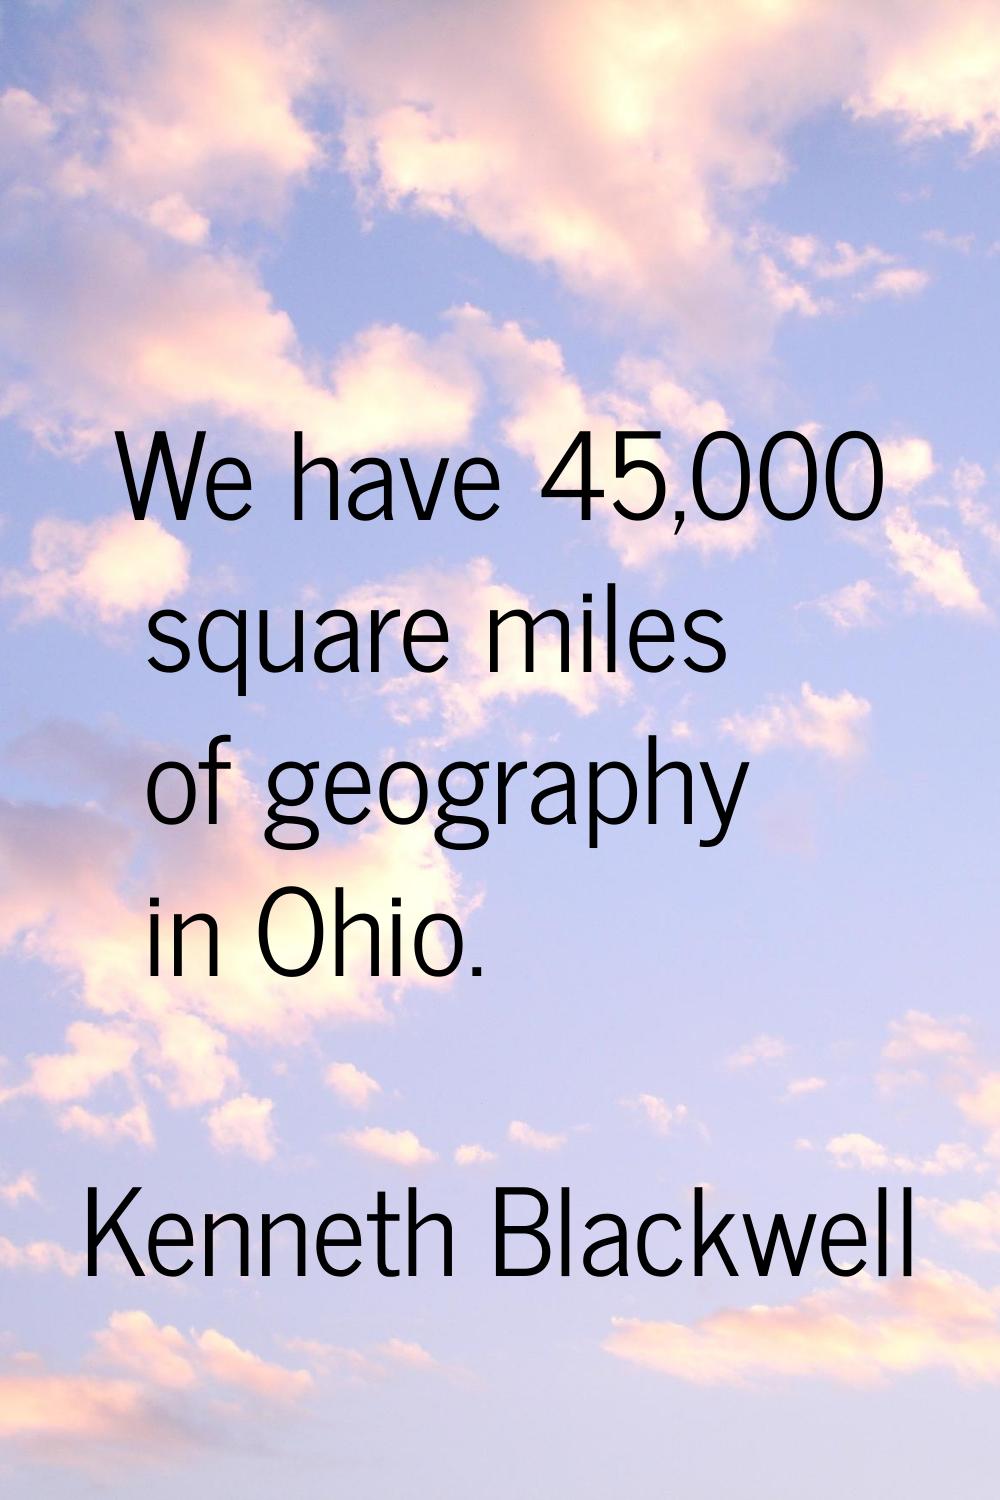 We have 45,000 square miles of geography in Ohio.